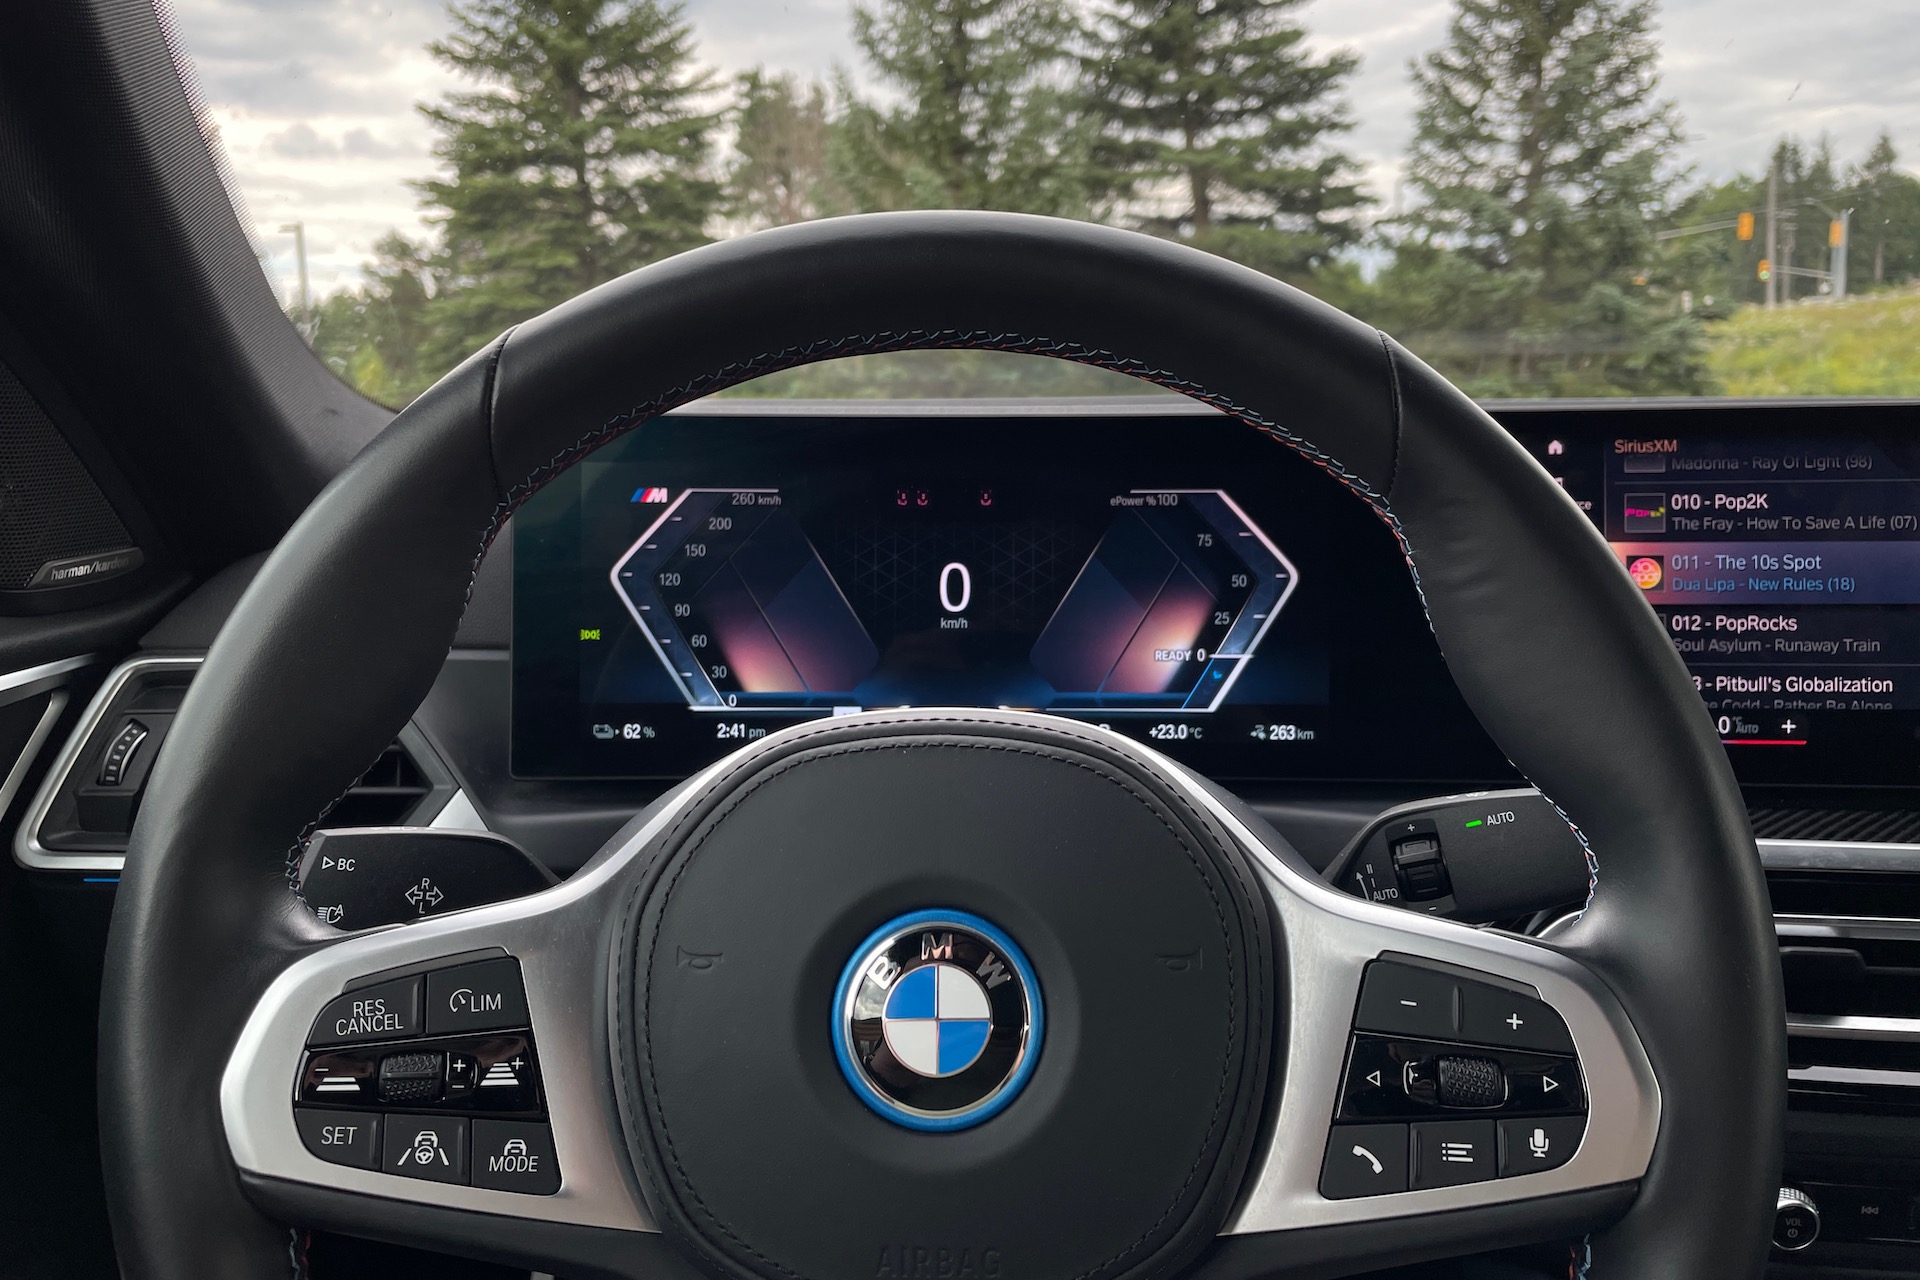 BMW's iDrive 8 infotainment system is not very good - Autoblog